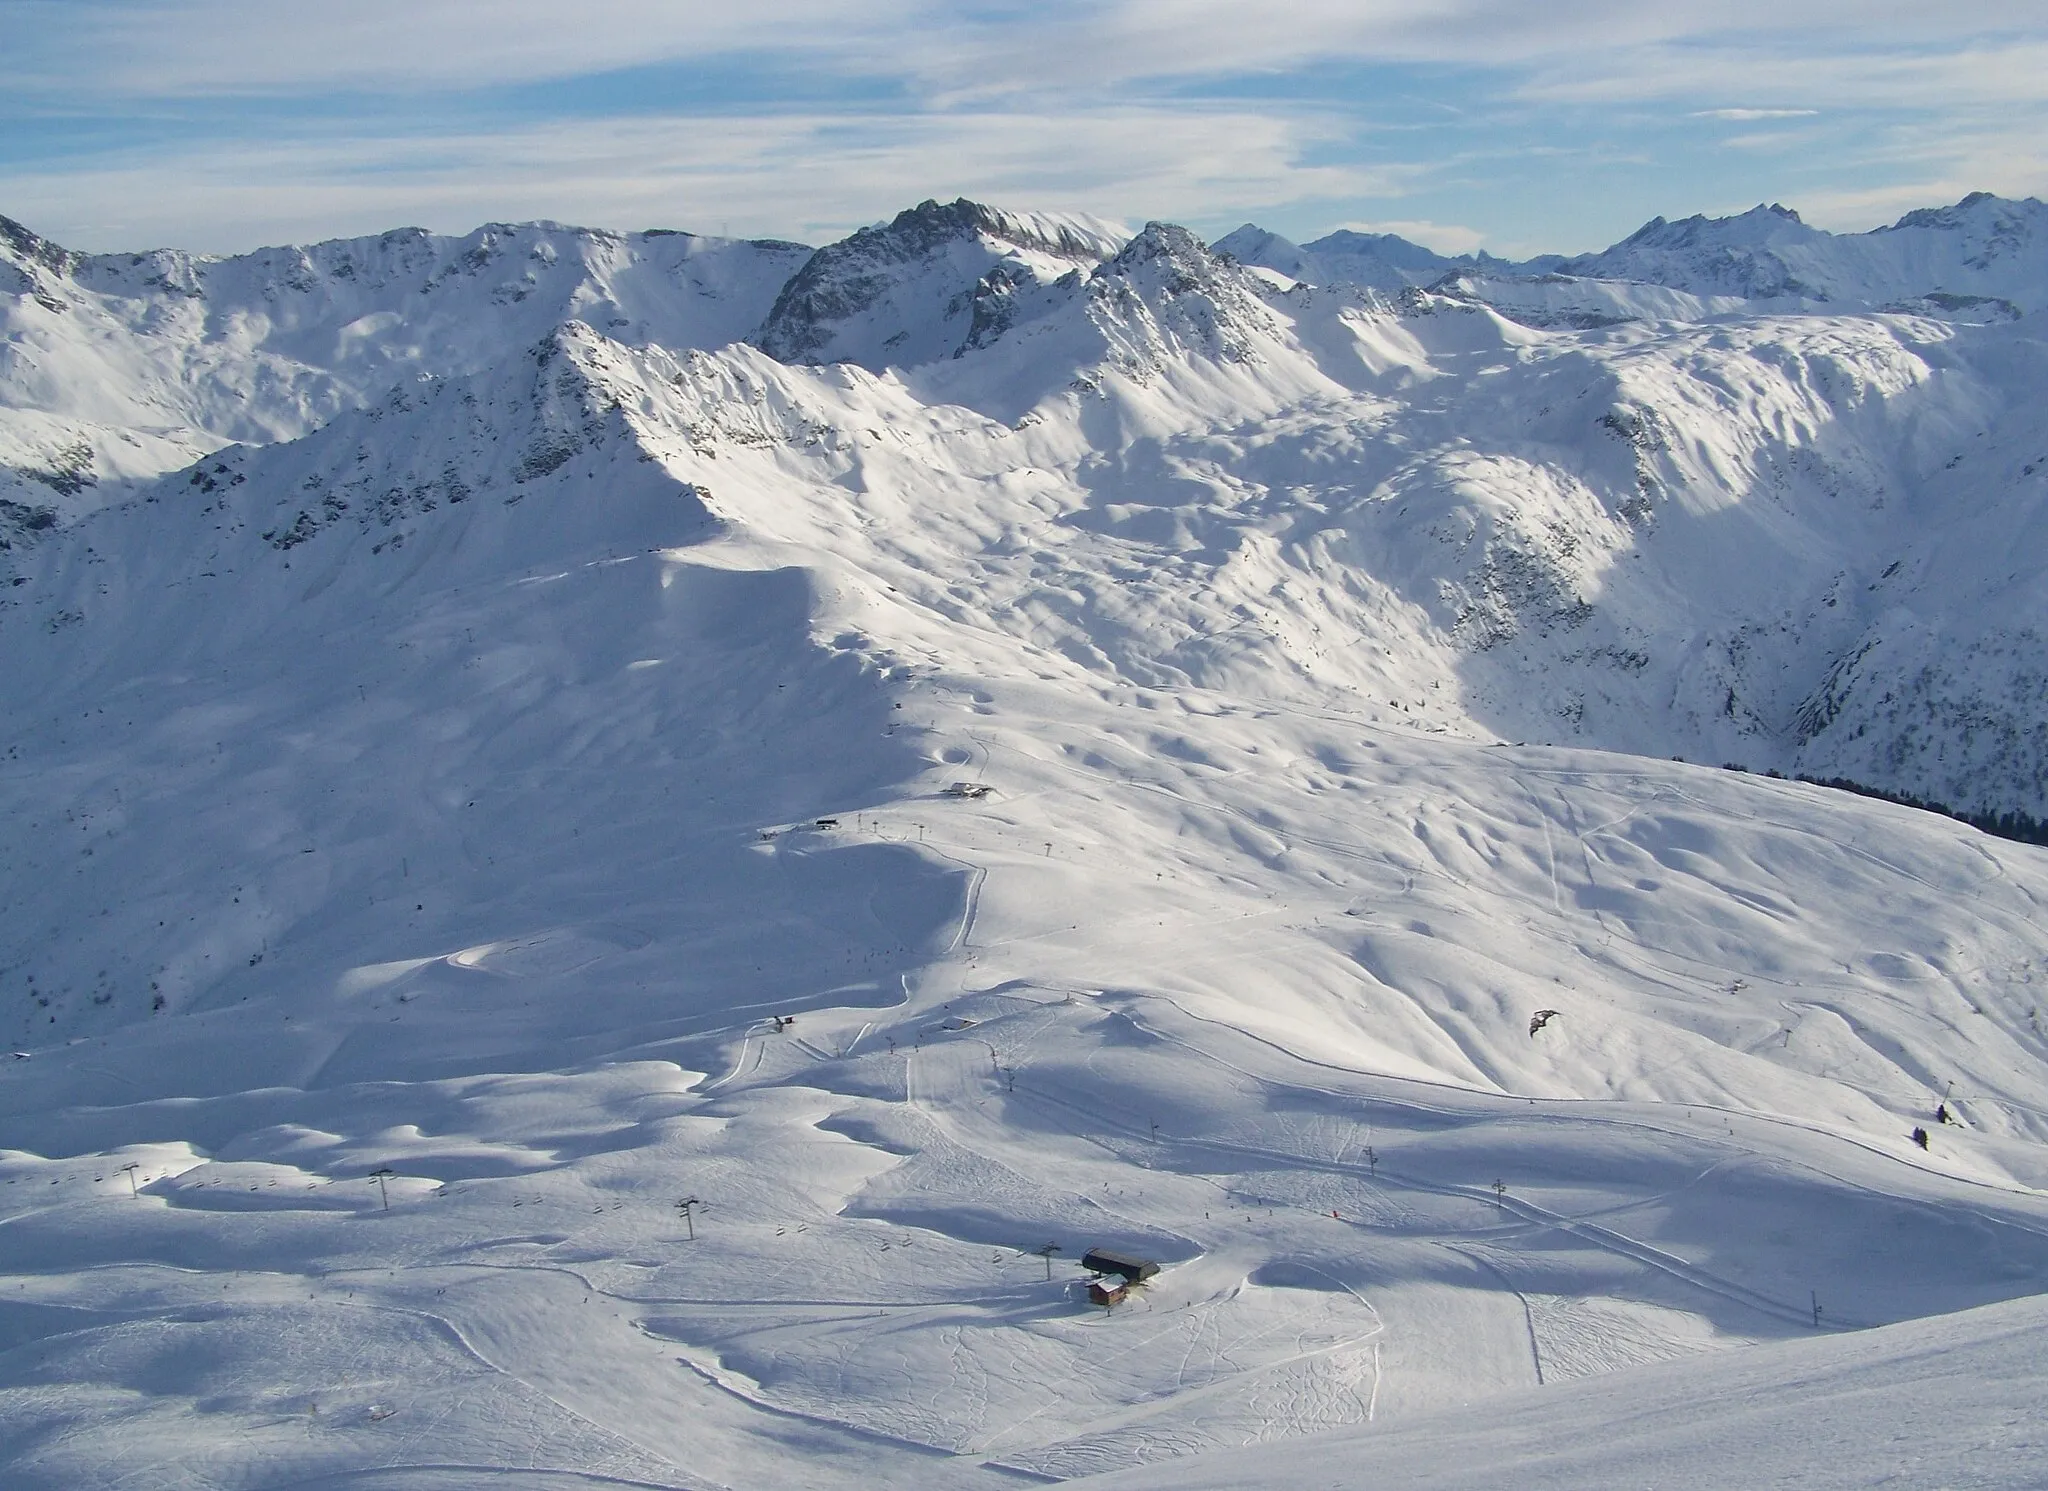 Photo showing: Sight of Les Contamines-Montjoie (left slope) and Hauteluce (right slope) ski resorts and col du Joly pass in Haute-Savoie and Savoie, France.